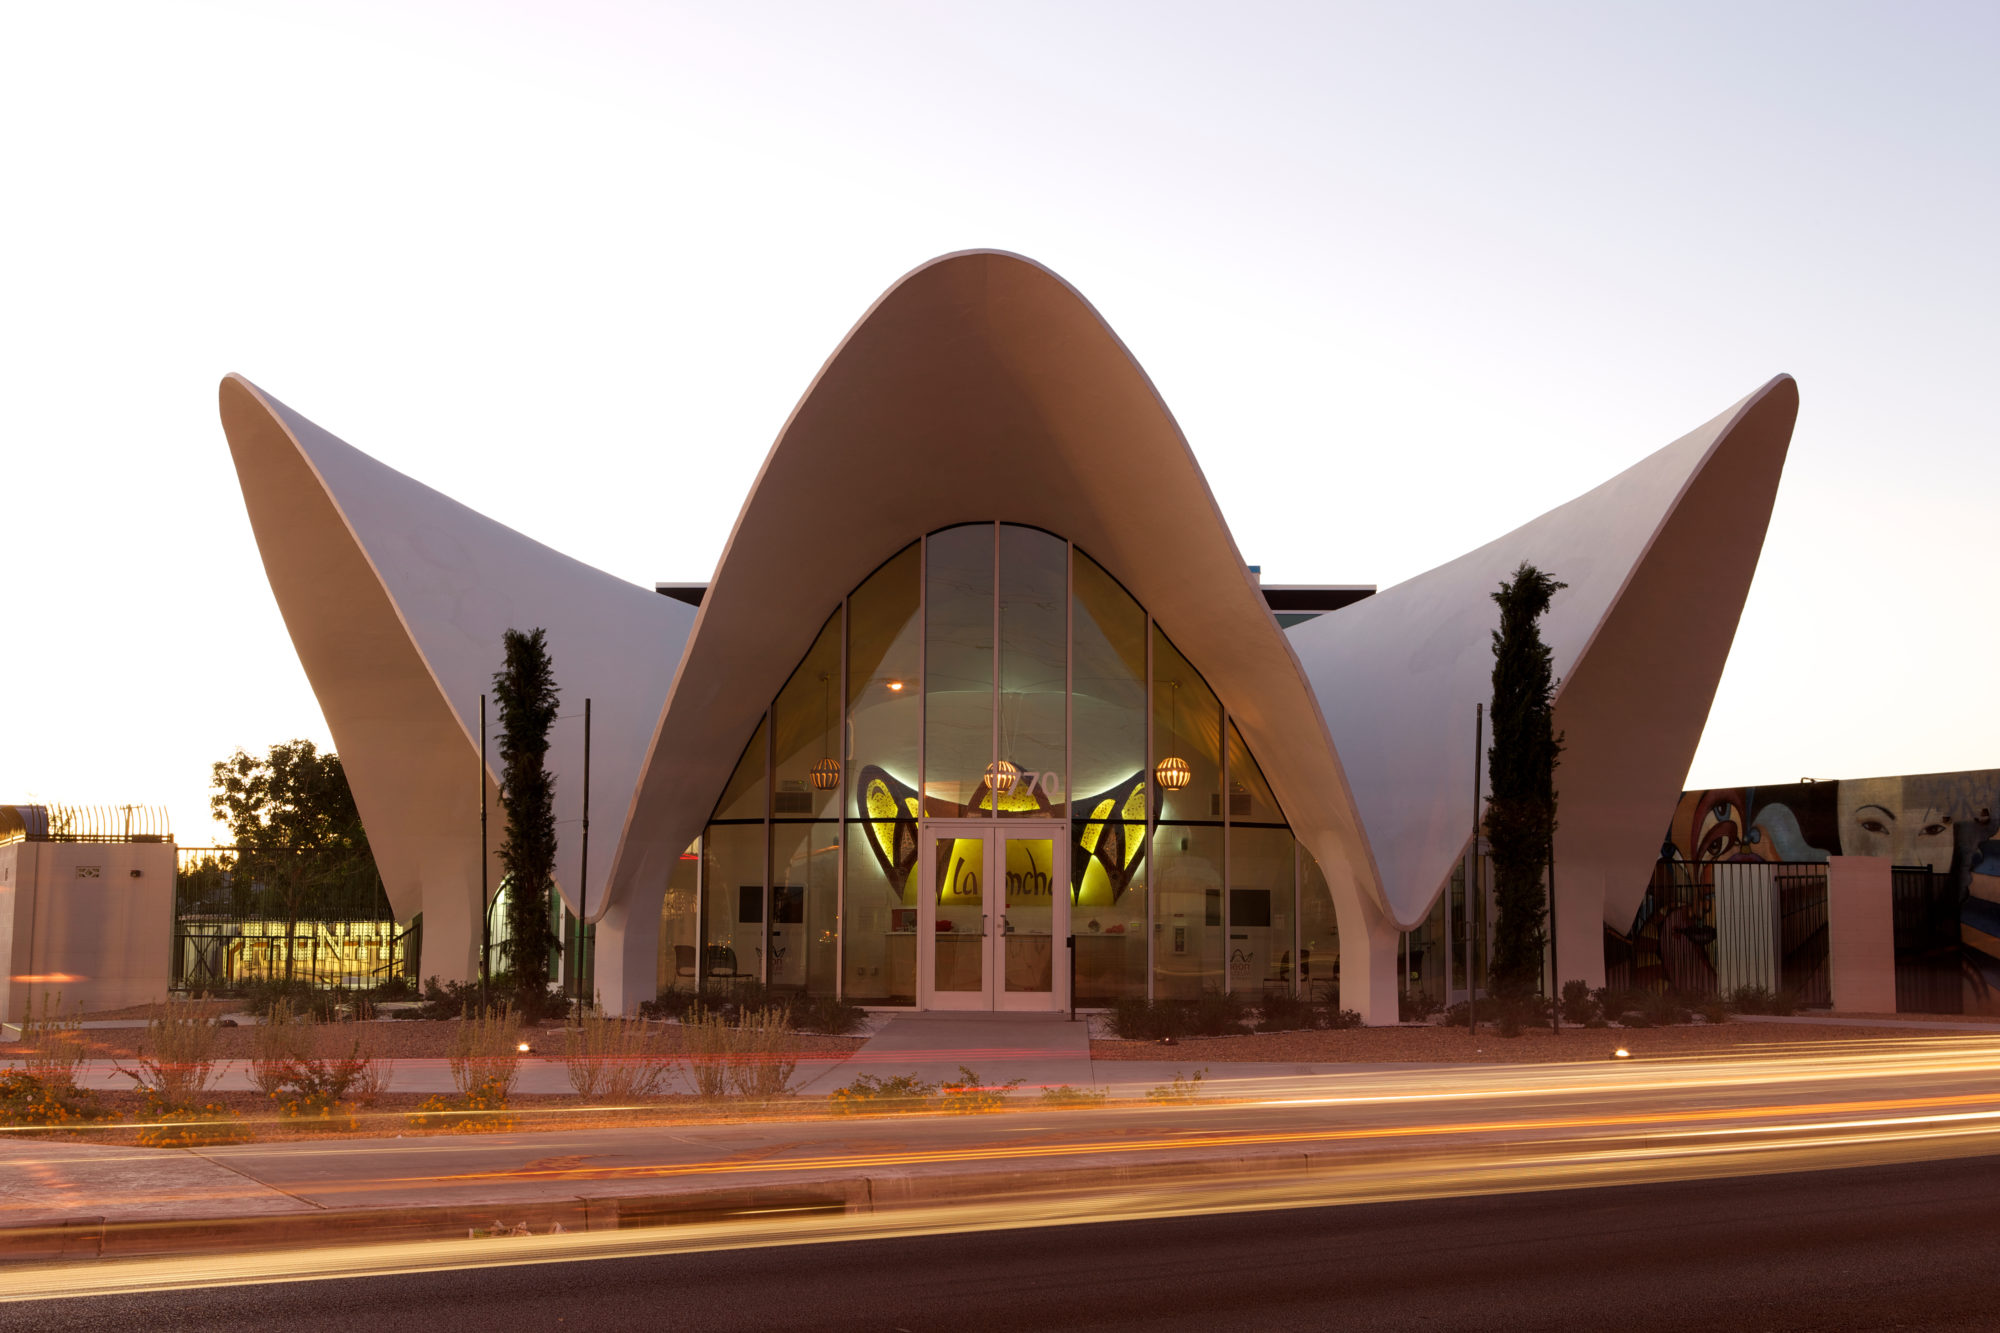 building with three triangular arches and glass front with yellow lit image inside